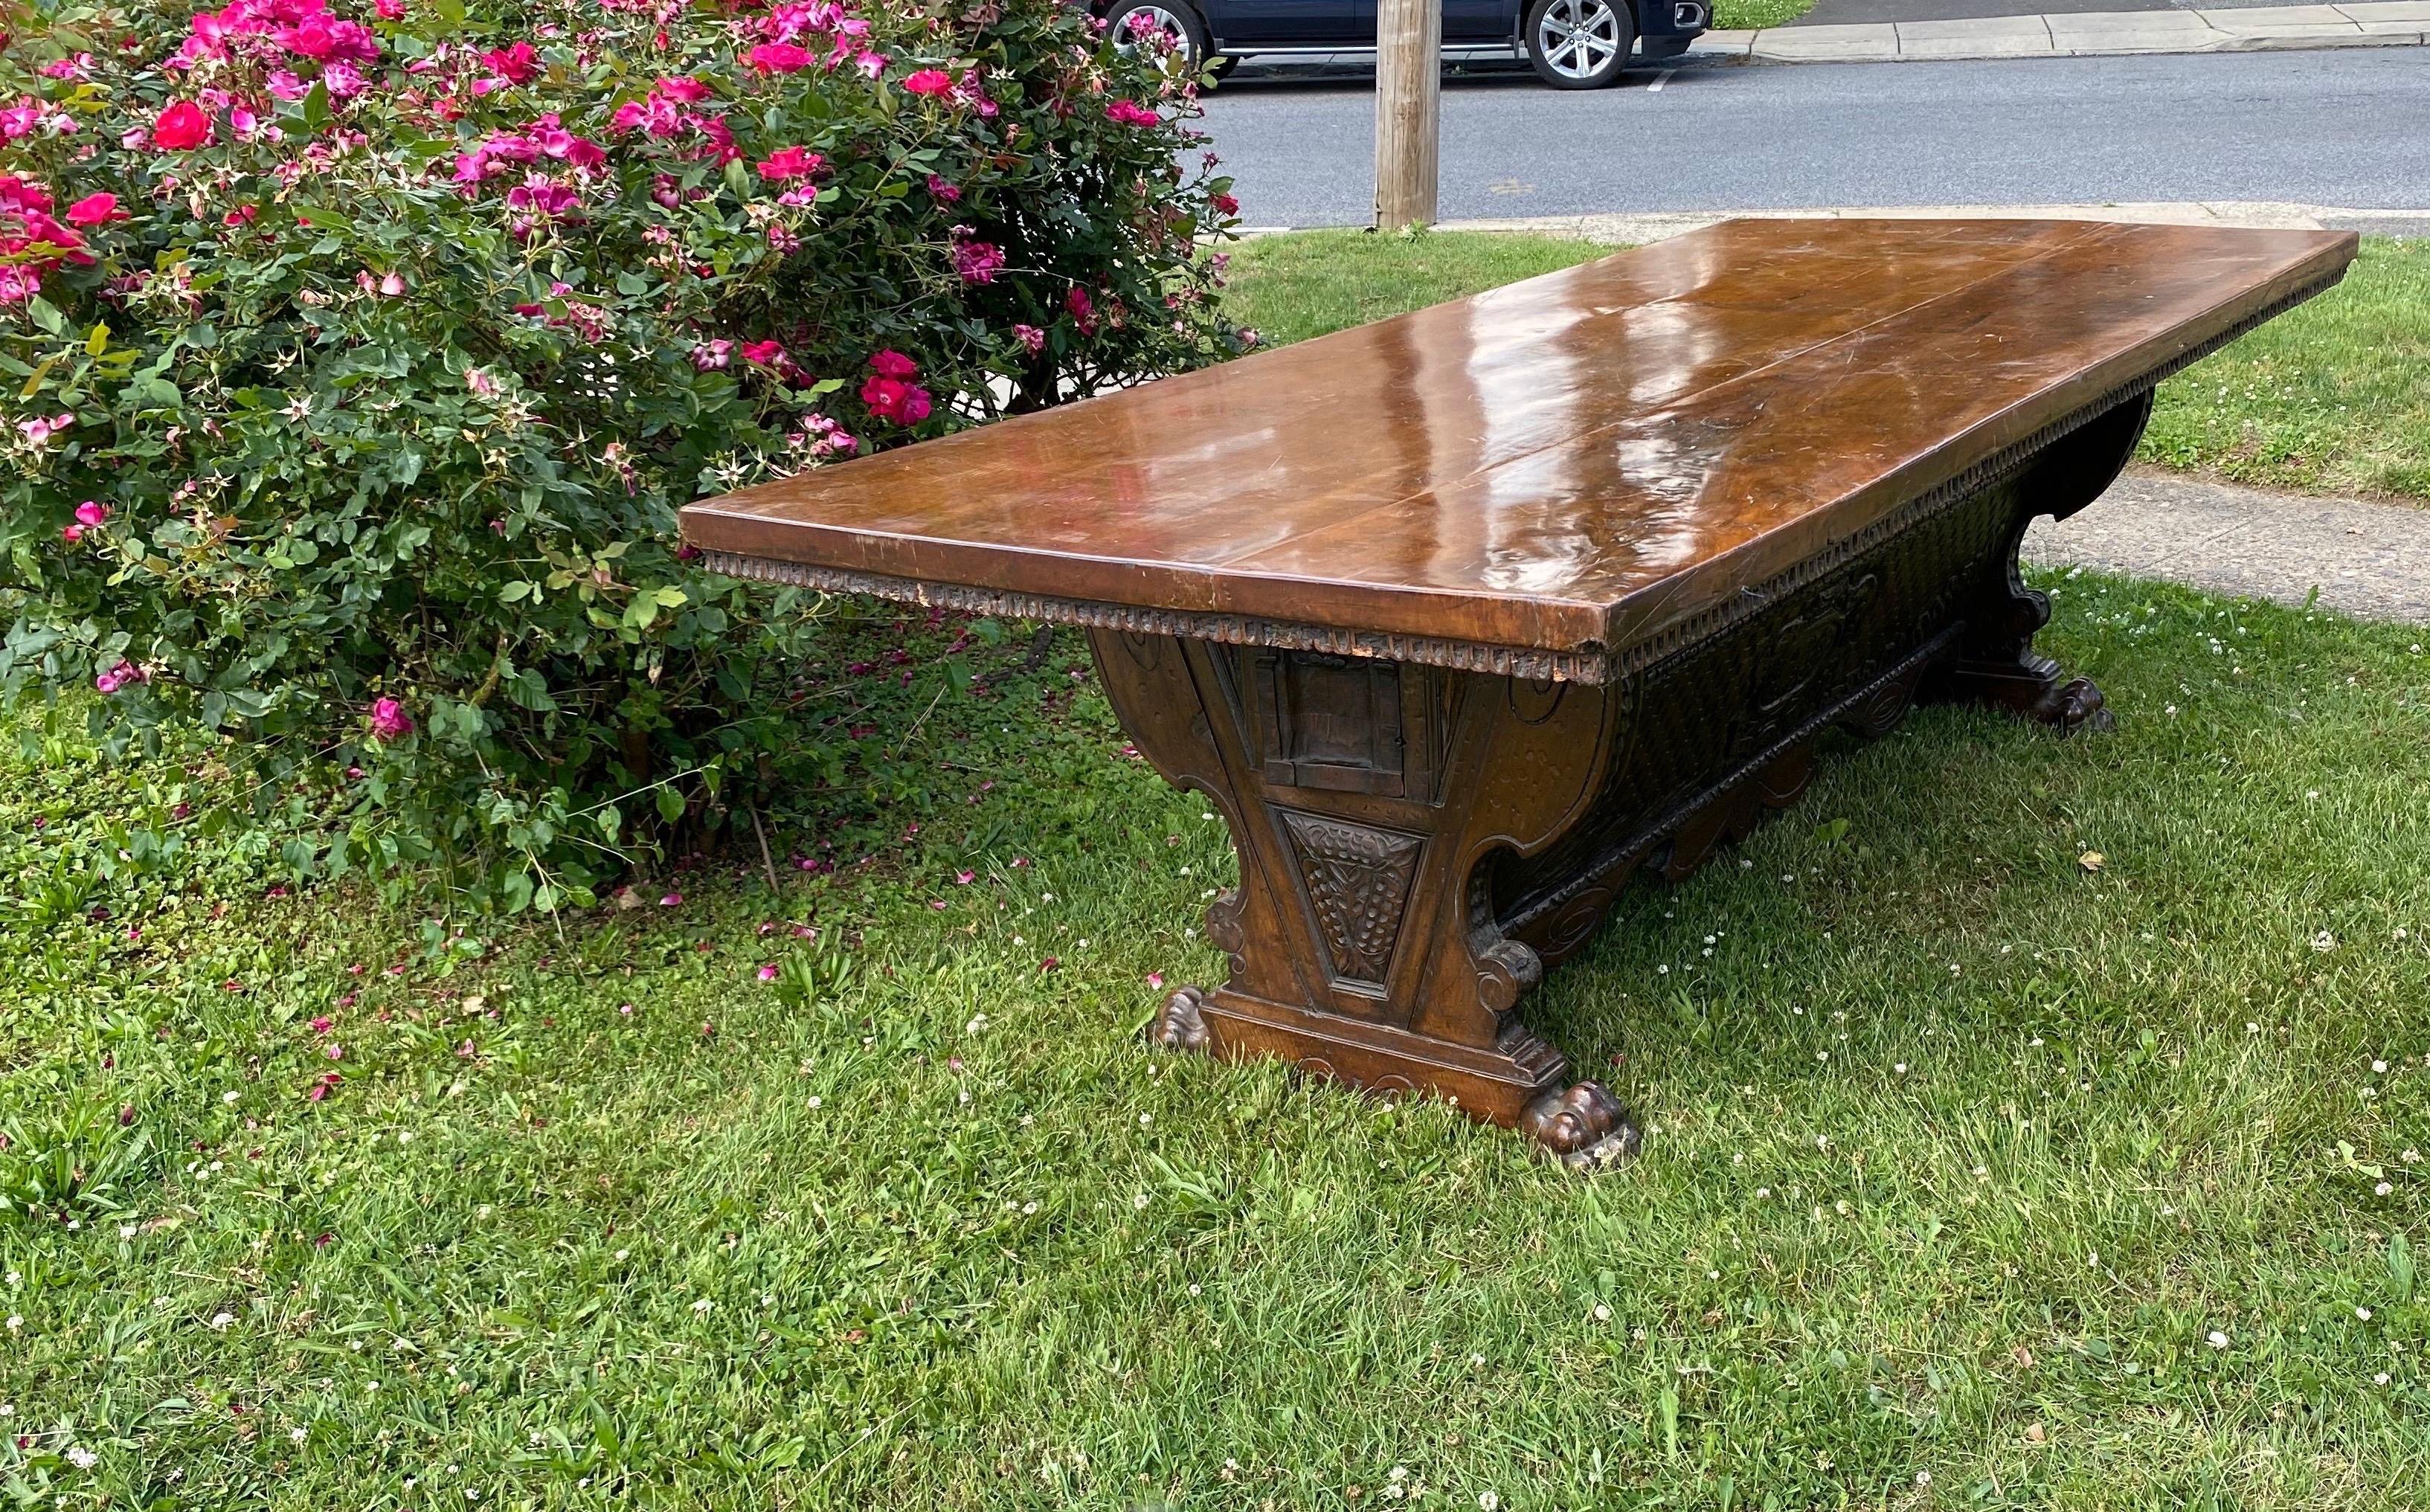 Impressive 17th century Tuscan baroque solid walnut dining or refractory table. Two solid walnut board top over a carved base with coat of arms and 2 tabernacle drawers on the sides resting on heavy, masculine paw feet. The color and patina on this